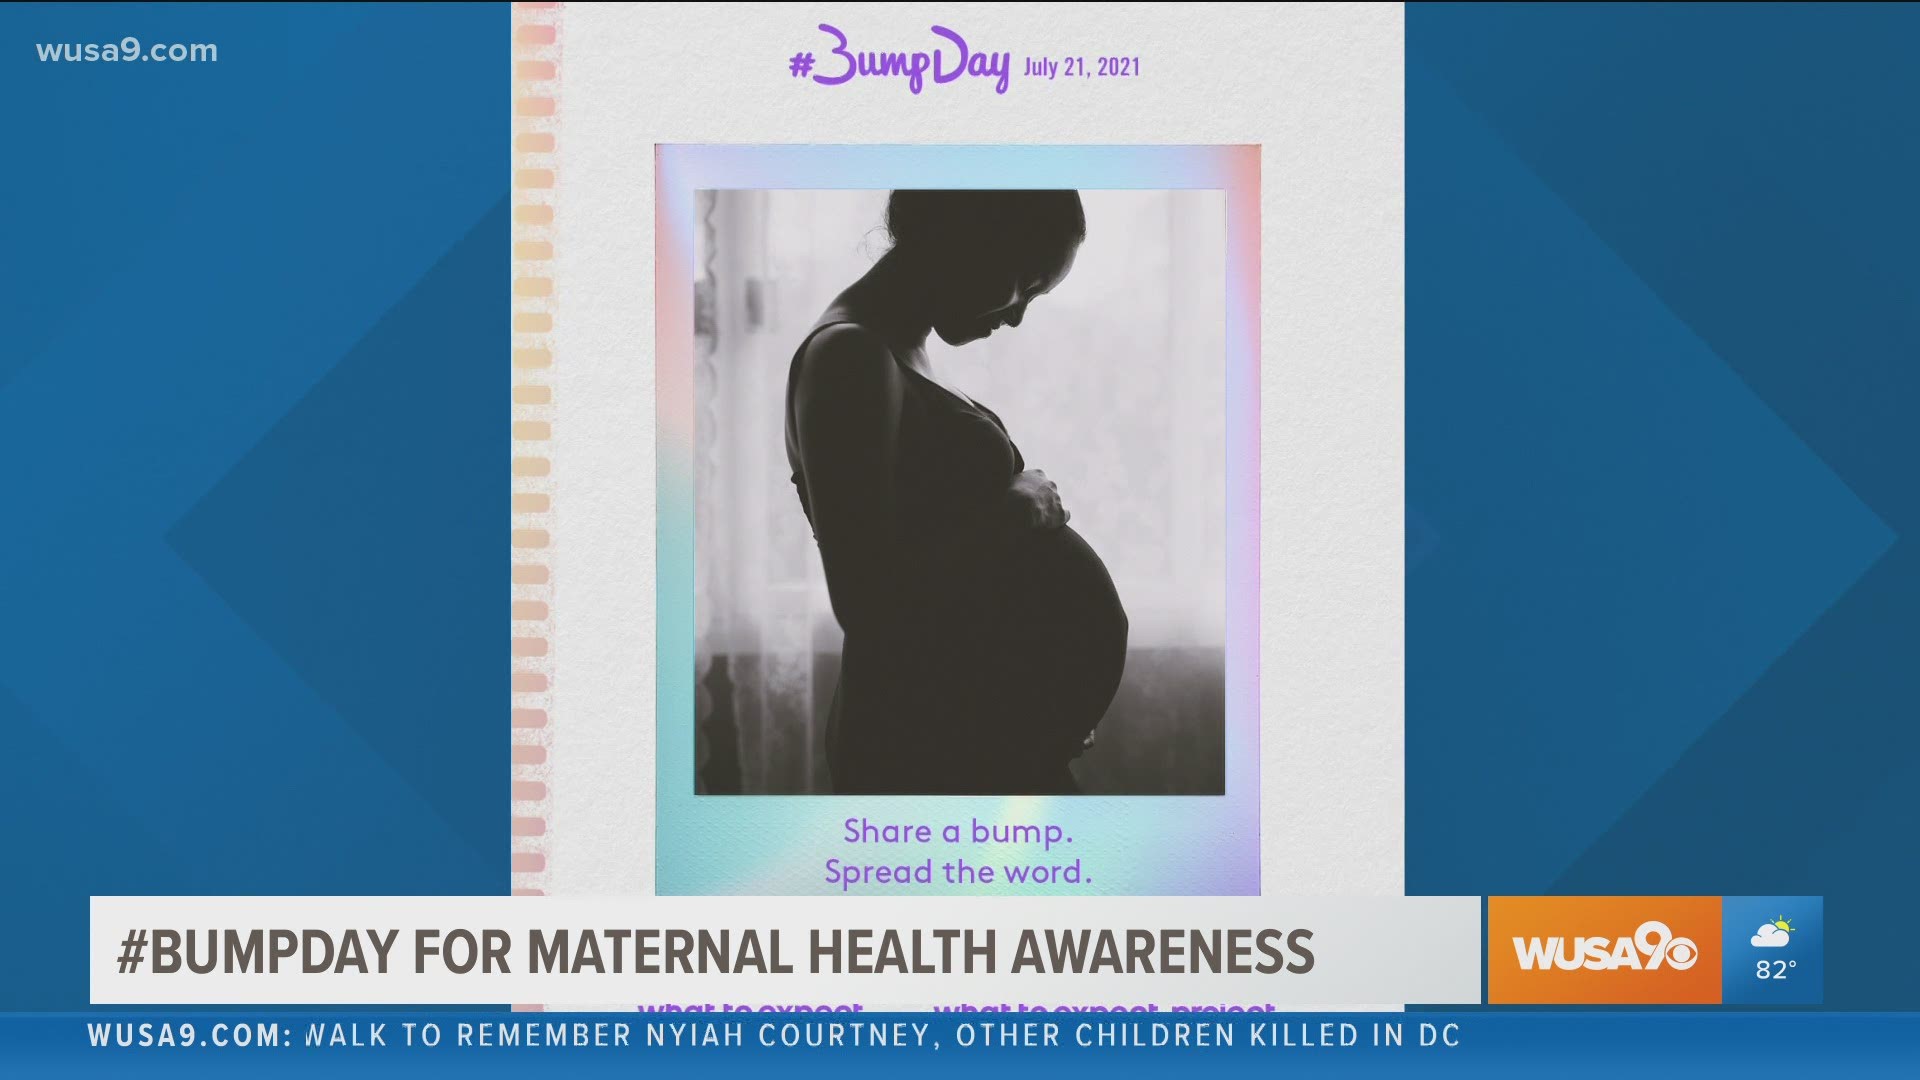 'What to Expect When You're Expecting' author Heidi Murkoff urges expectant moms to share a bump picture using #BumpDay for maternal health awareness.